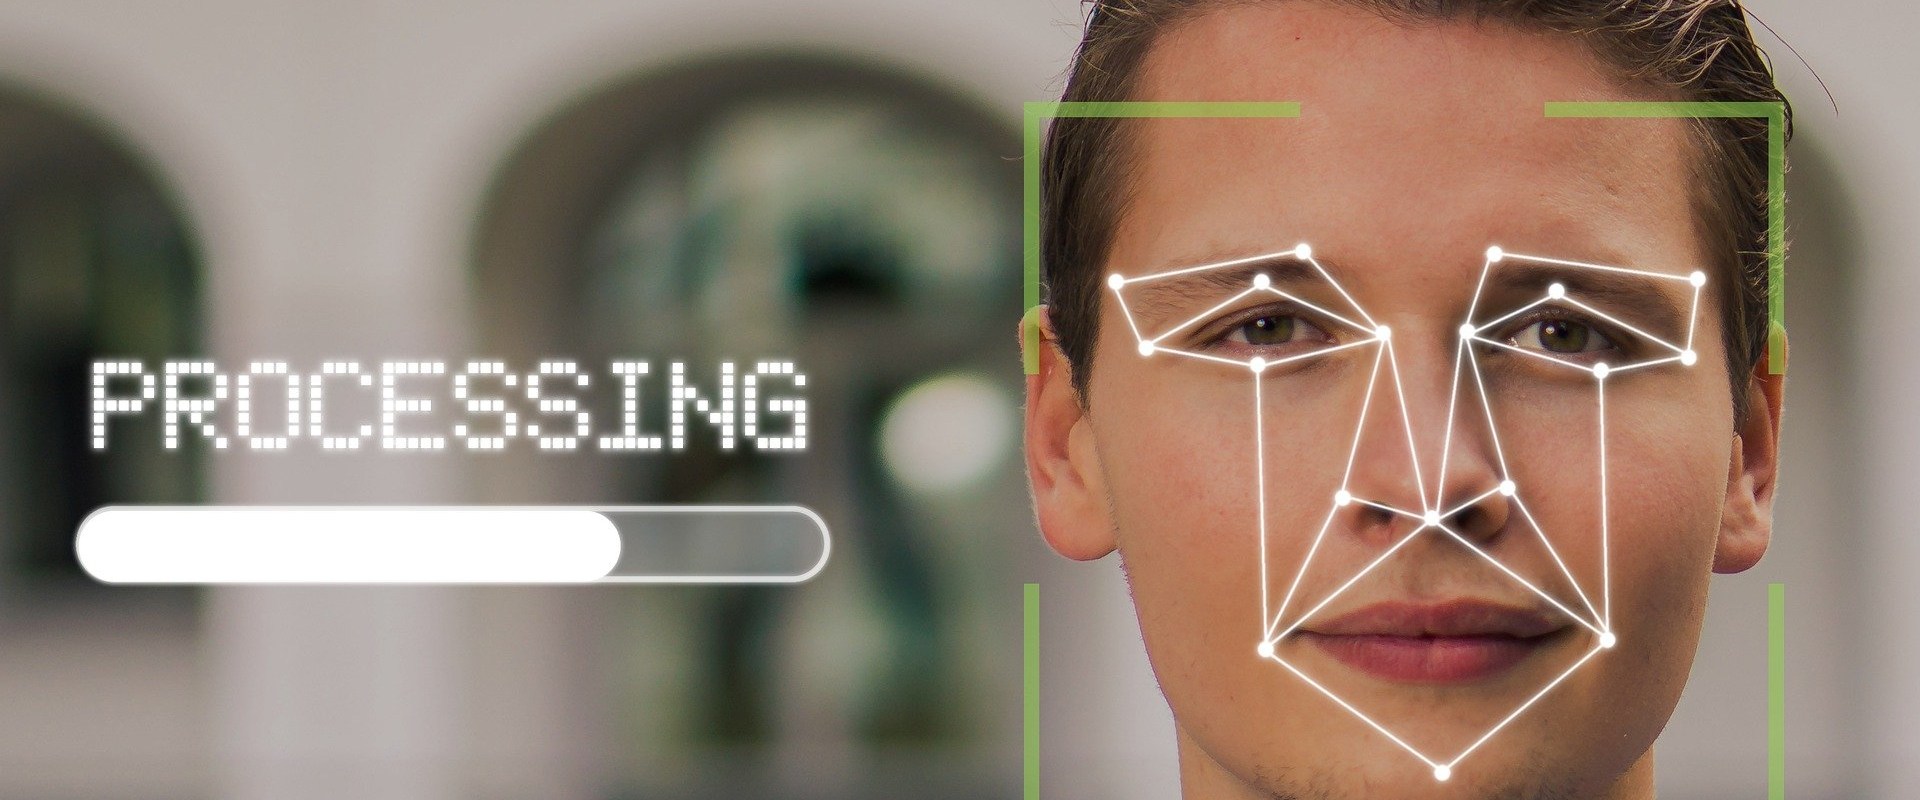 Face Recognition Systems: An Overview